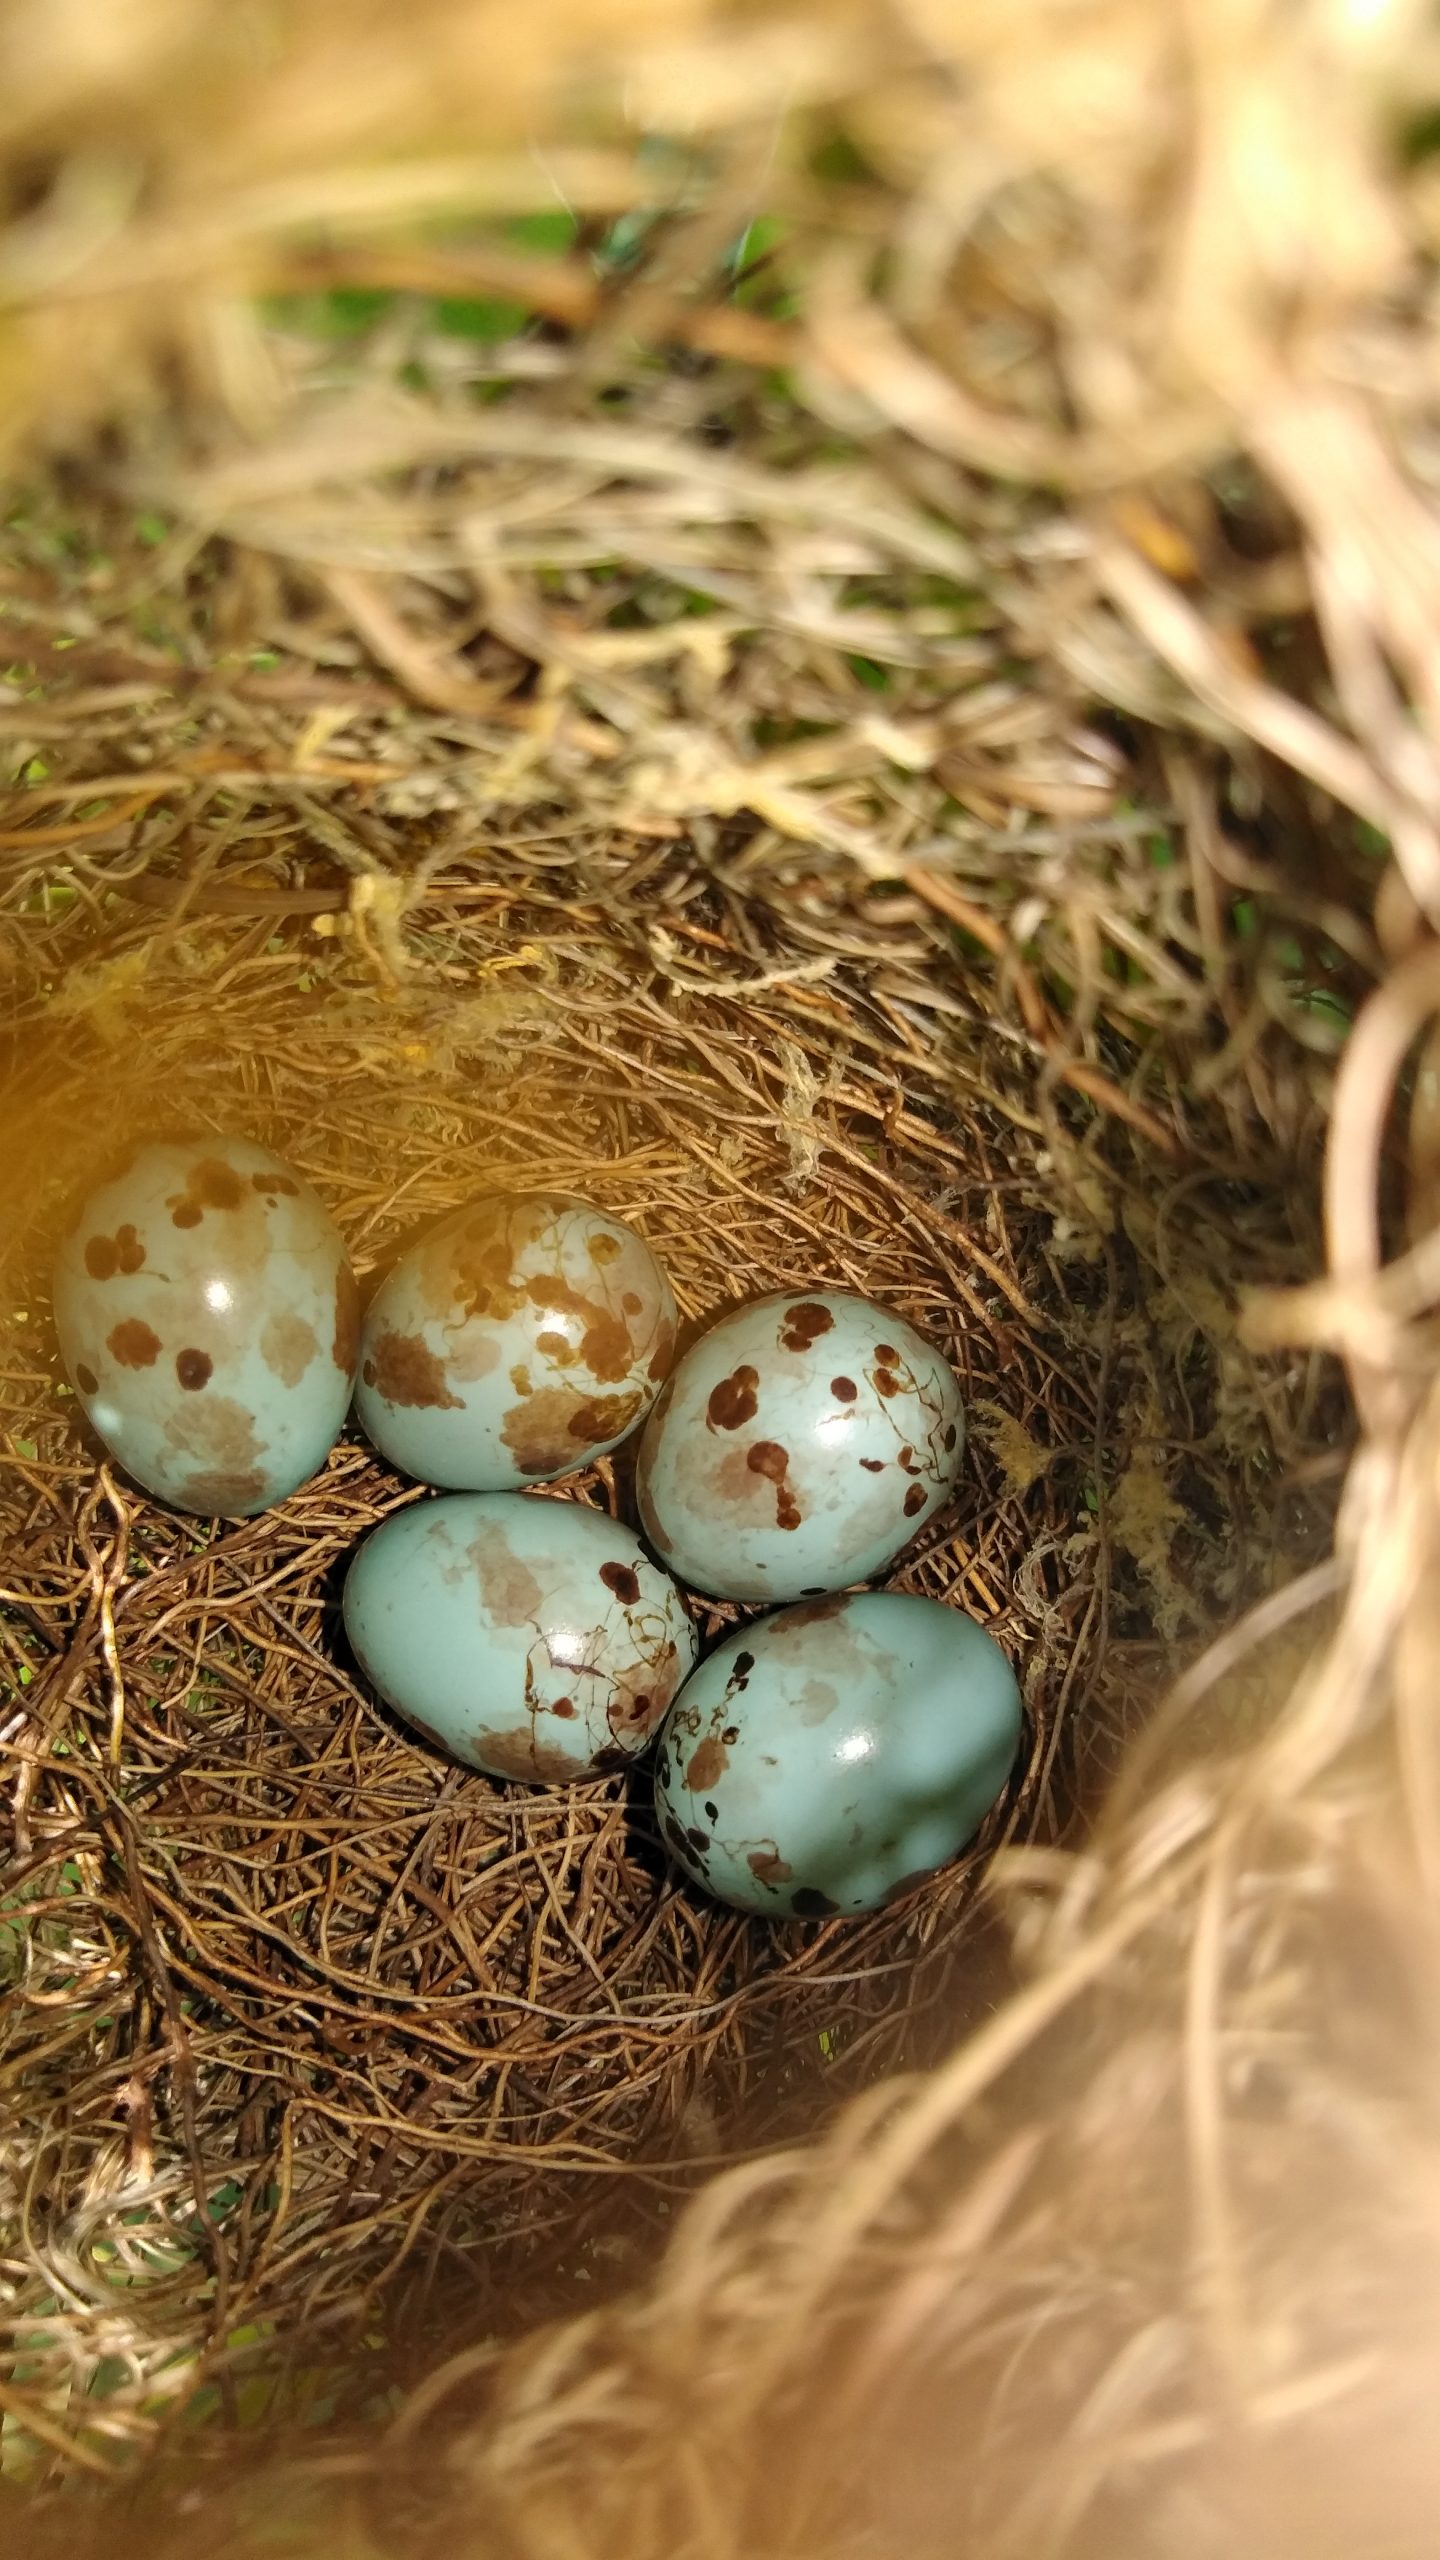 Eggs in a nest